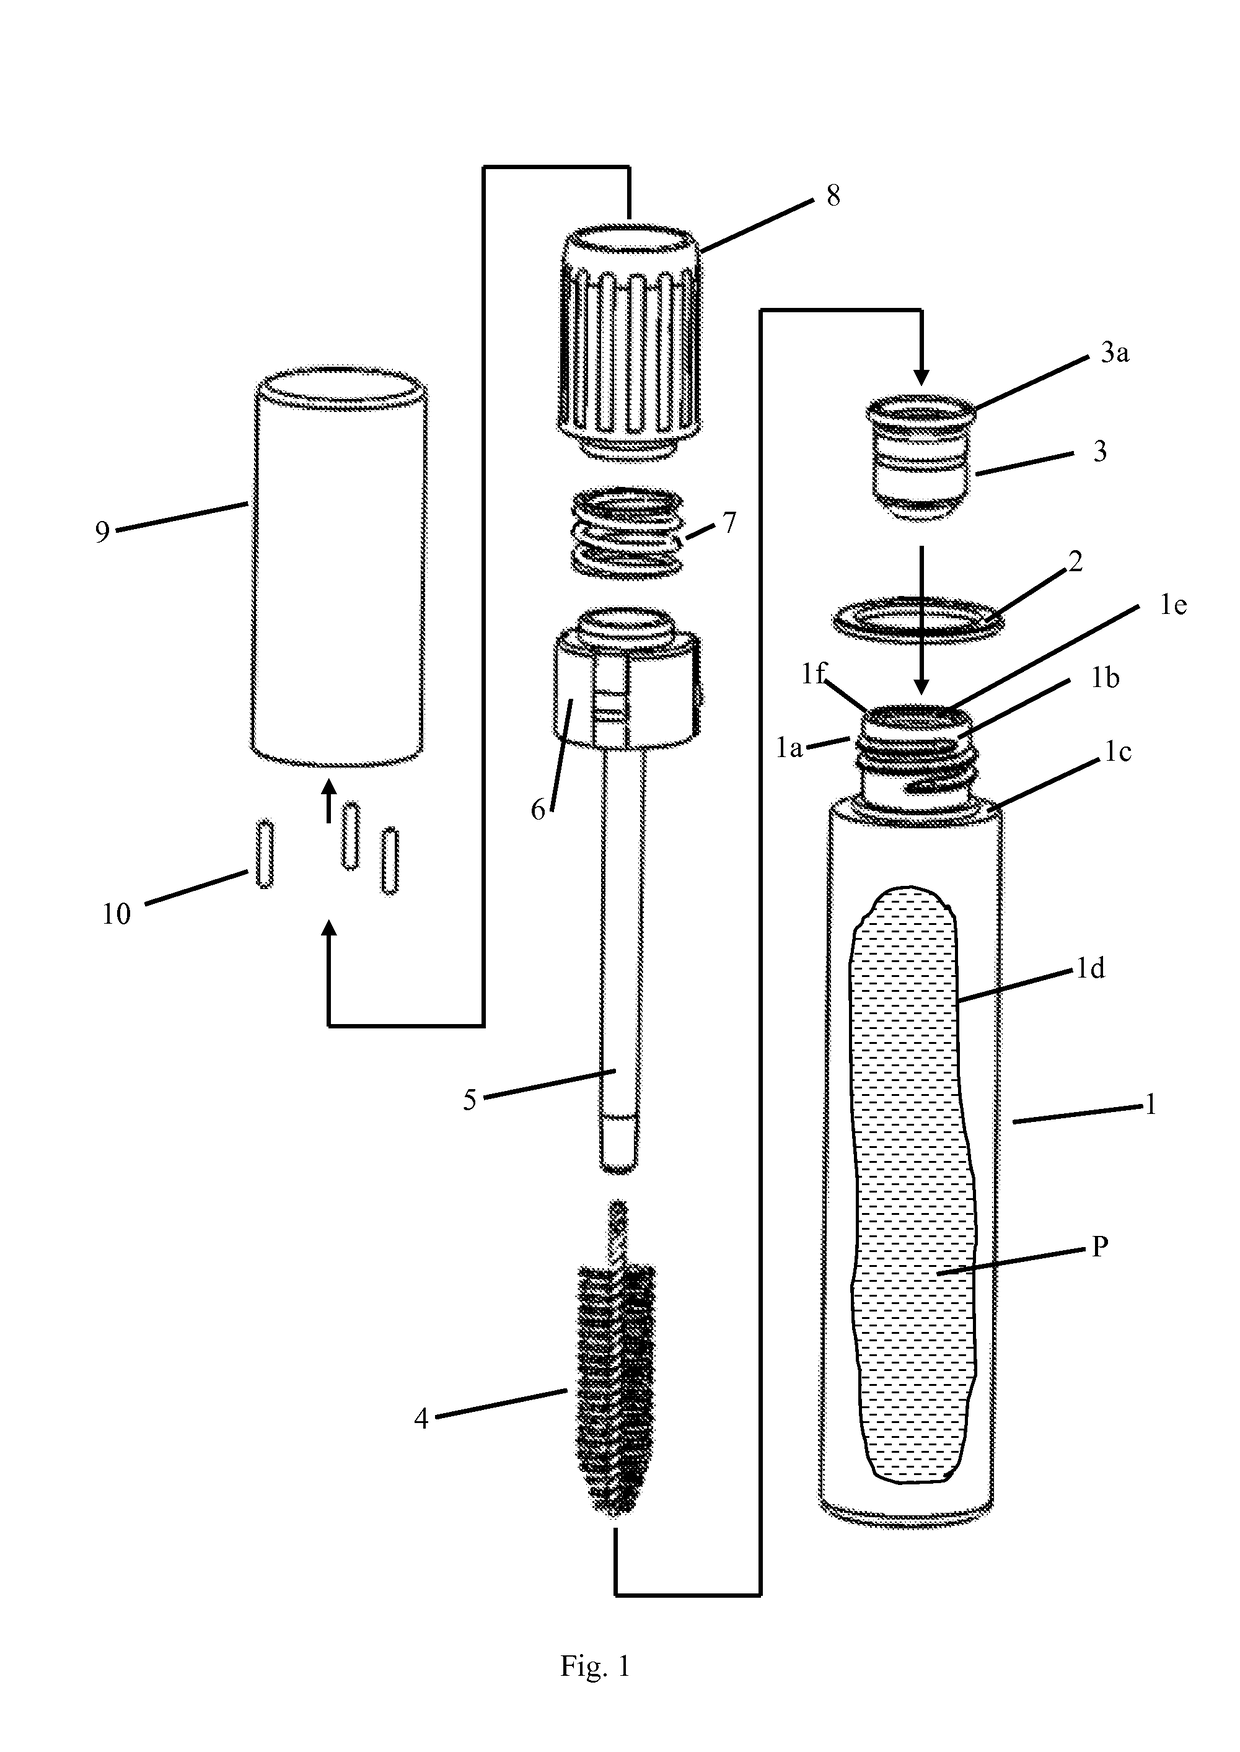 Screw-Type Closure Systems With Magnetic Feature